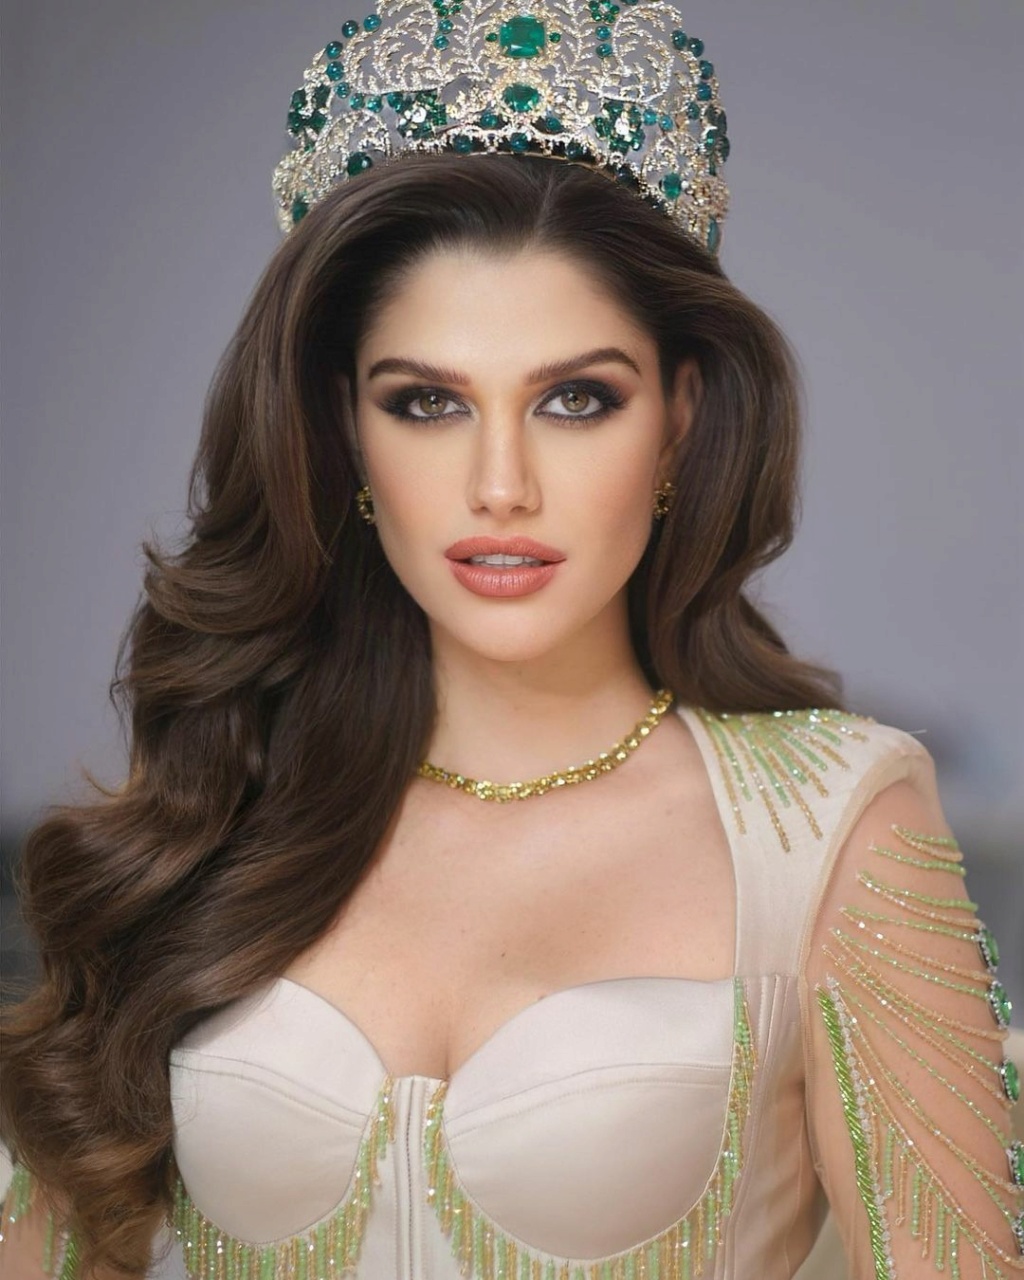 The Official Thread Of MISS GRAND INTERNATIONAL 2022 : ISABELLA MENIN from BRAZIL. - Page 2 32849910